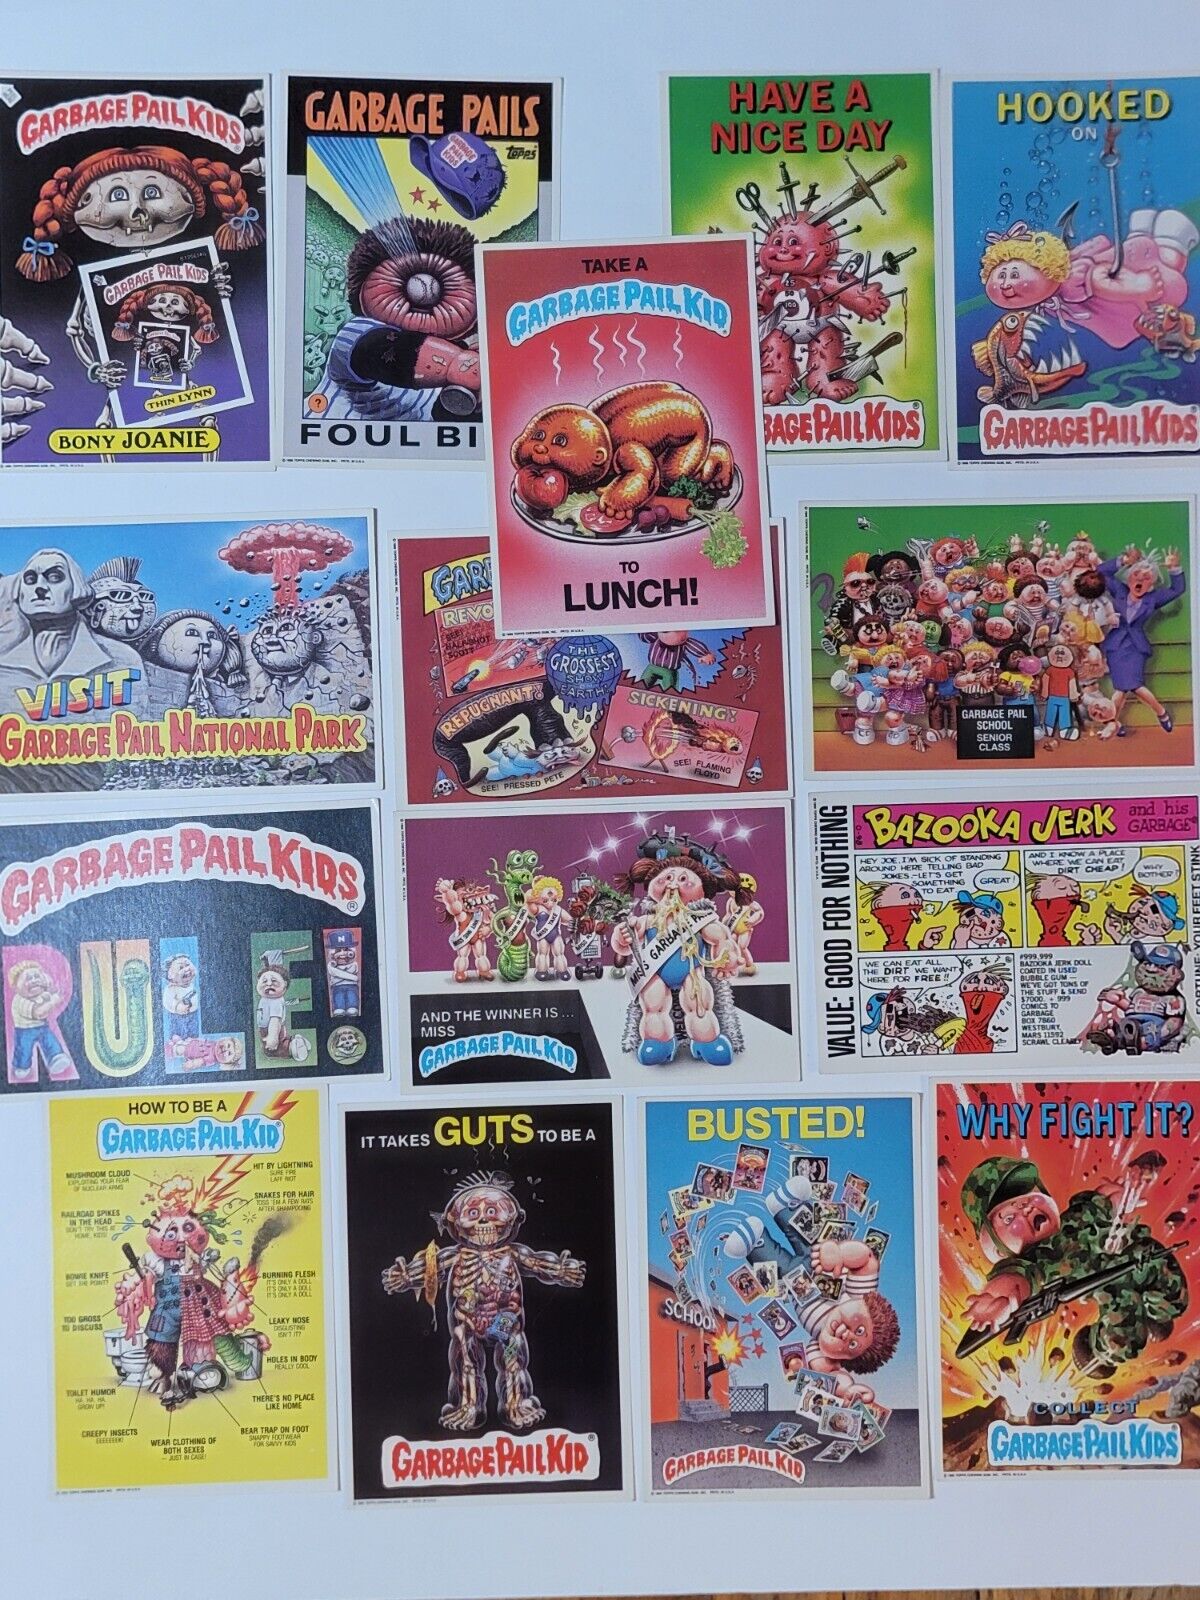 Vintage Garbage Pail Kids GPK Giant Stickers Card #1-#15 Cards 1986 Topps